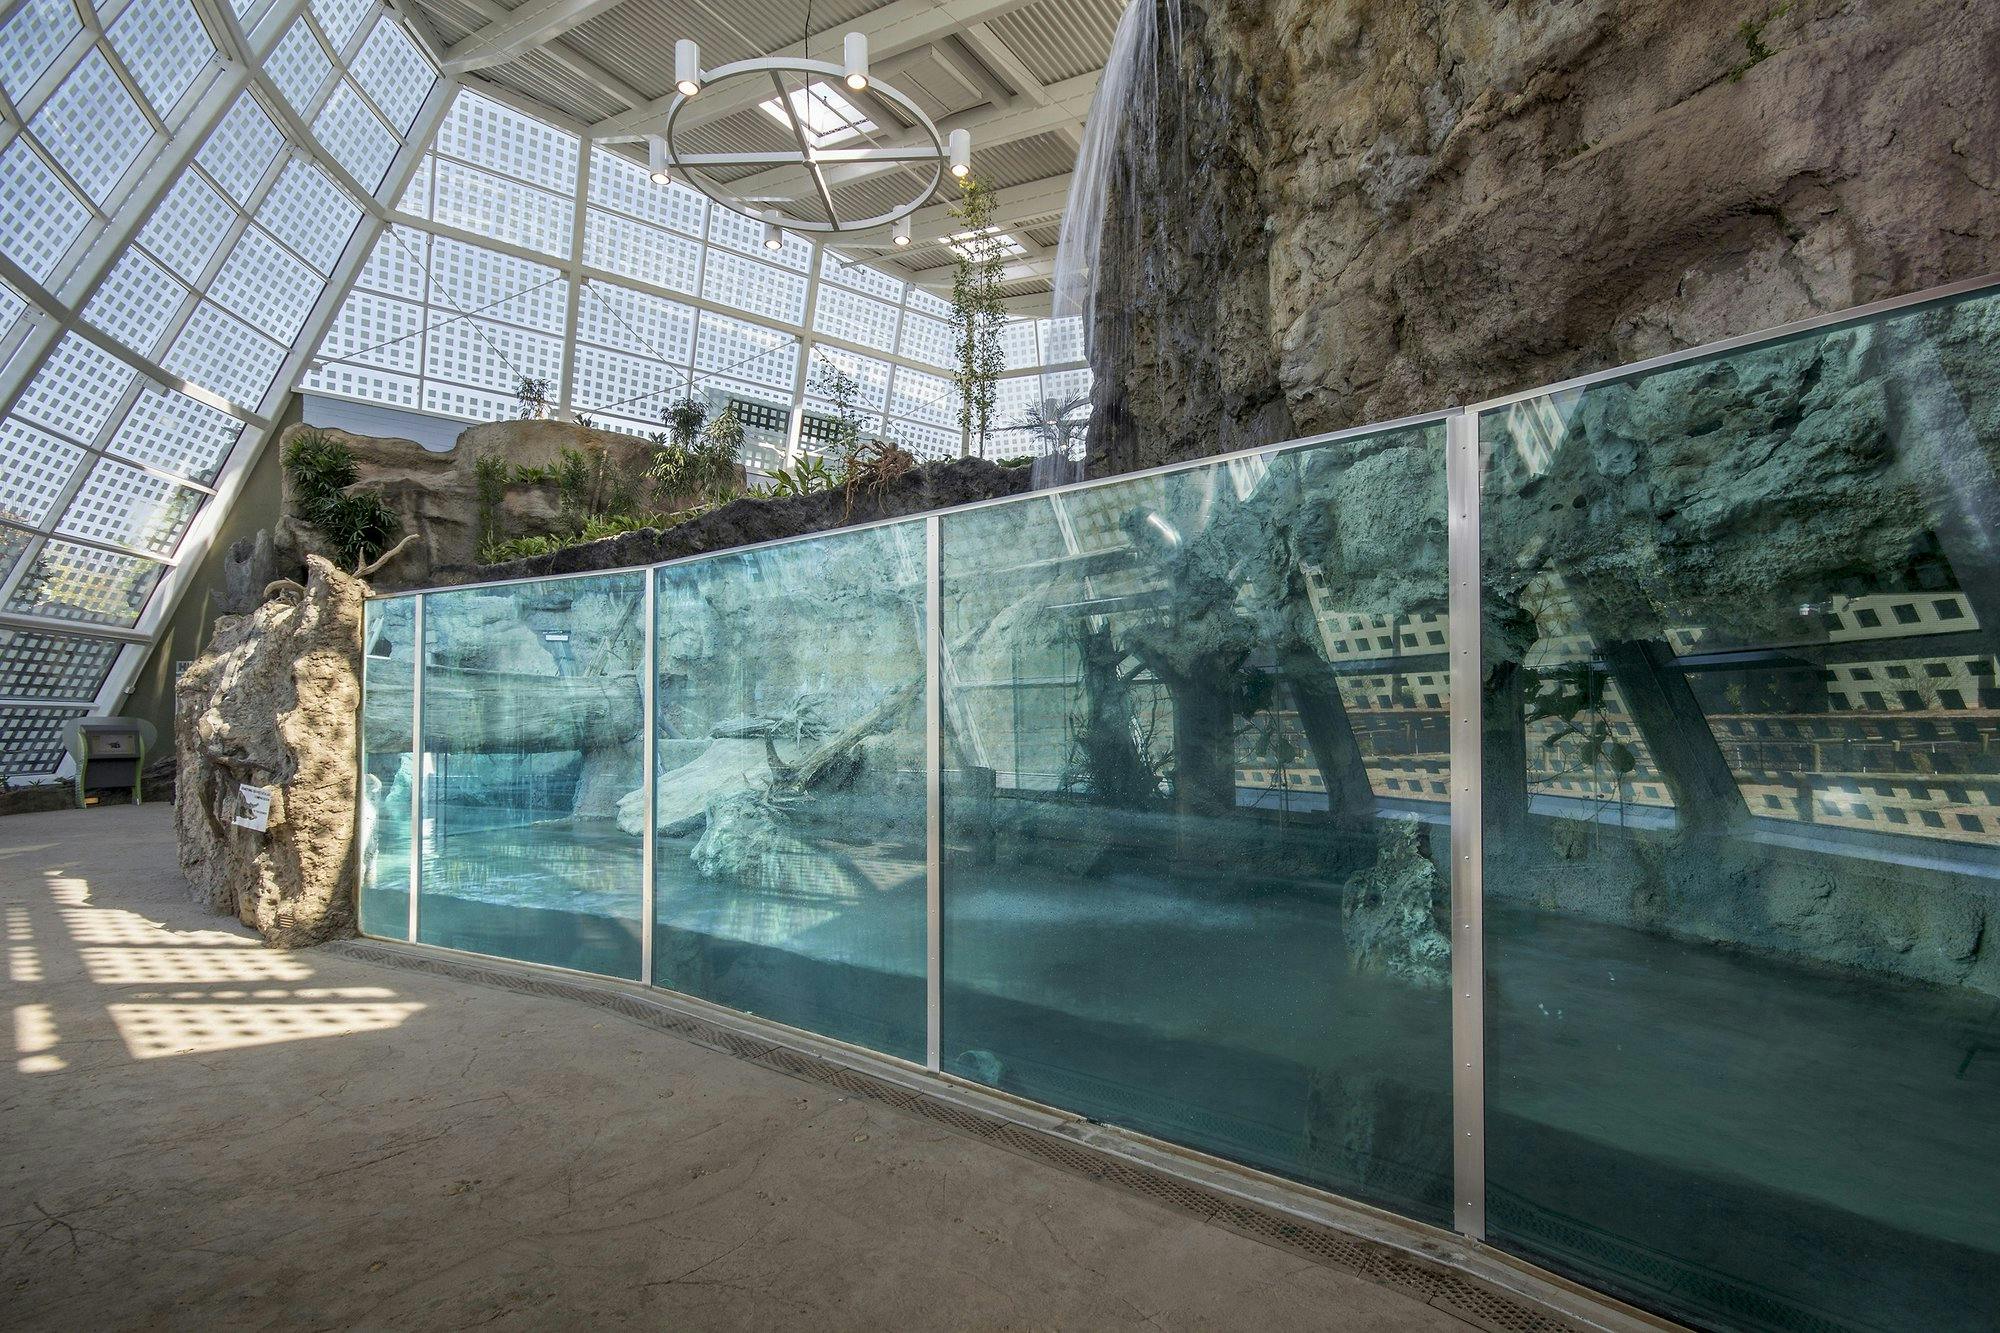 Interior of a reptile exhibit with a barrier in the foreground and a reptile habitat in the background